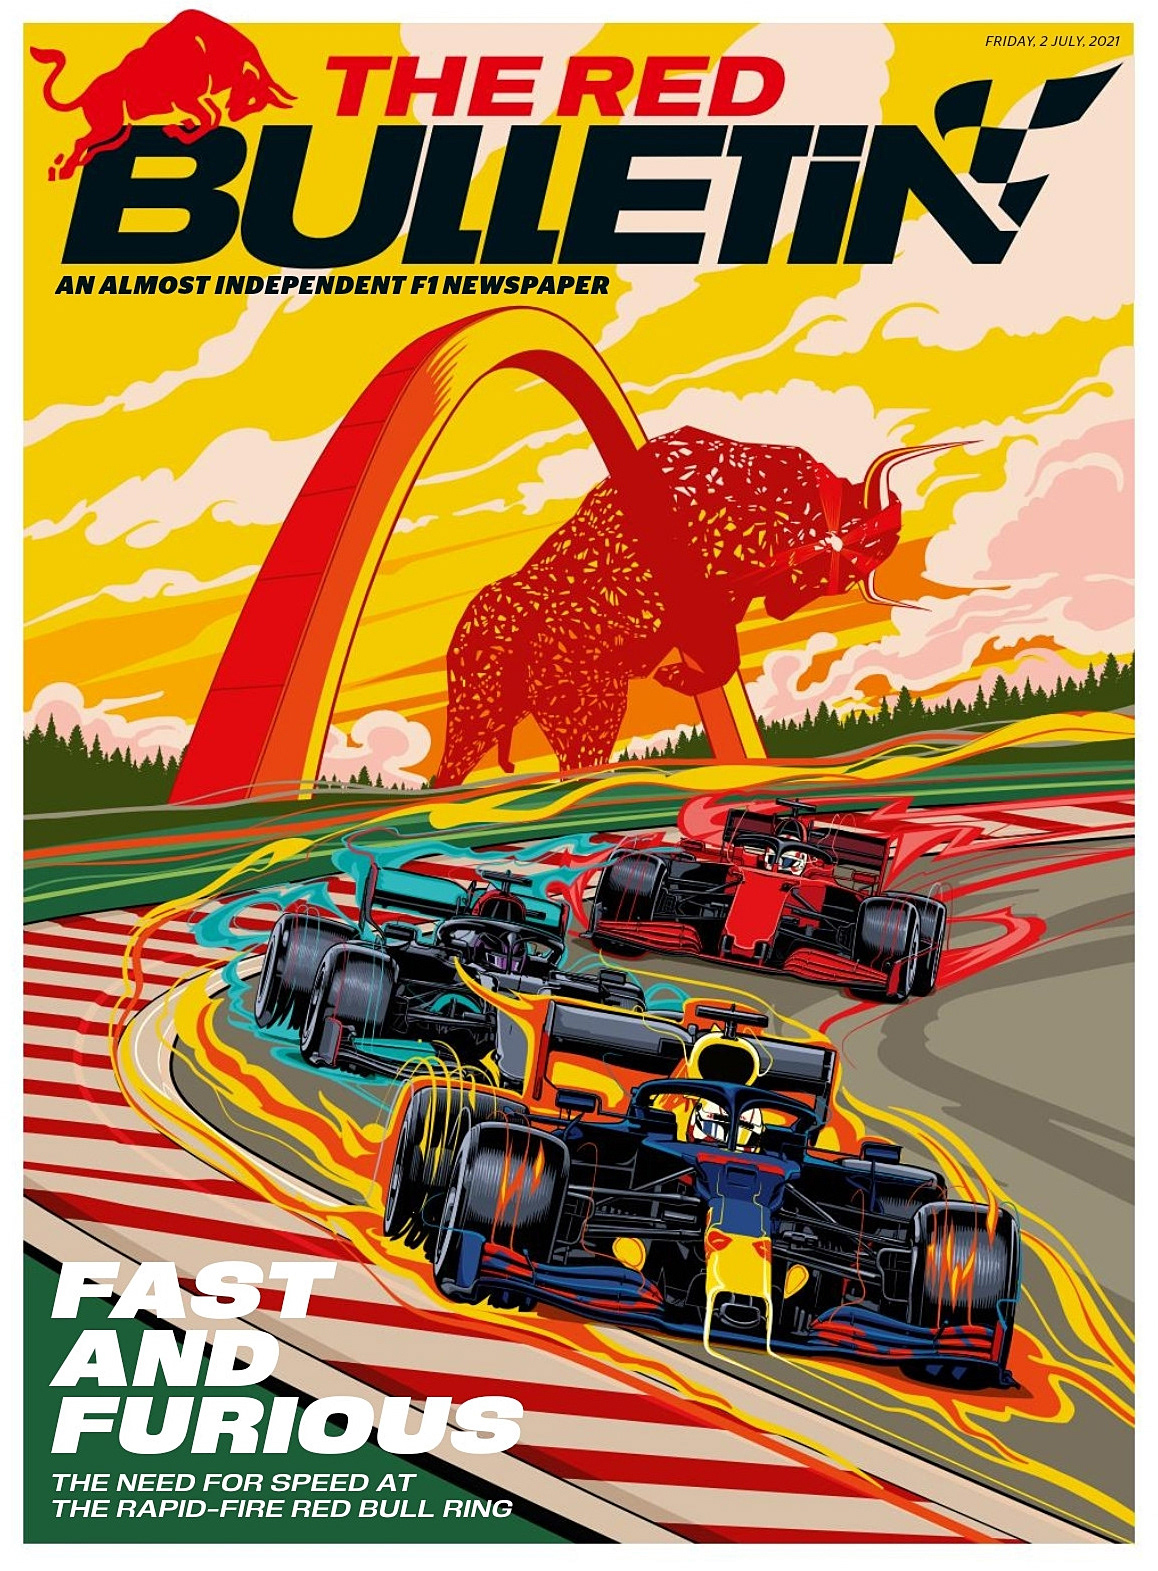 The Red Bulletin Novembro 2015 - BR by Red Bull Media House - Issuu